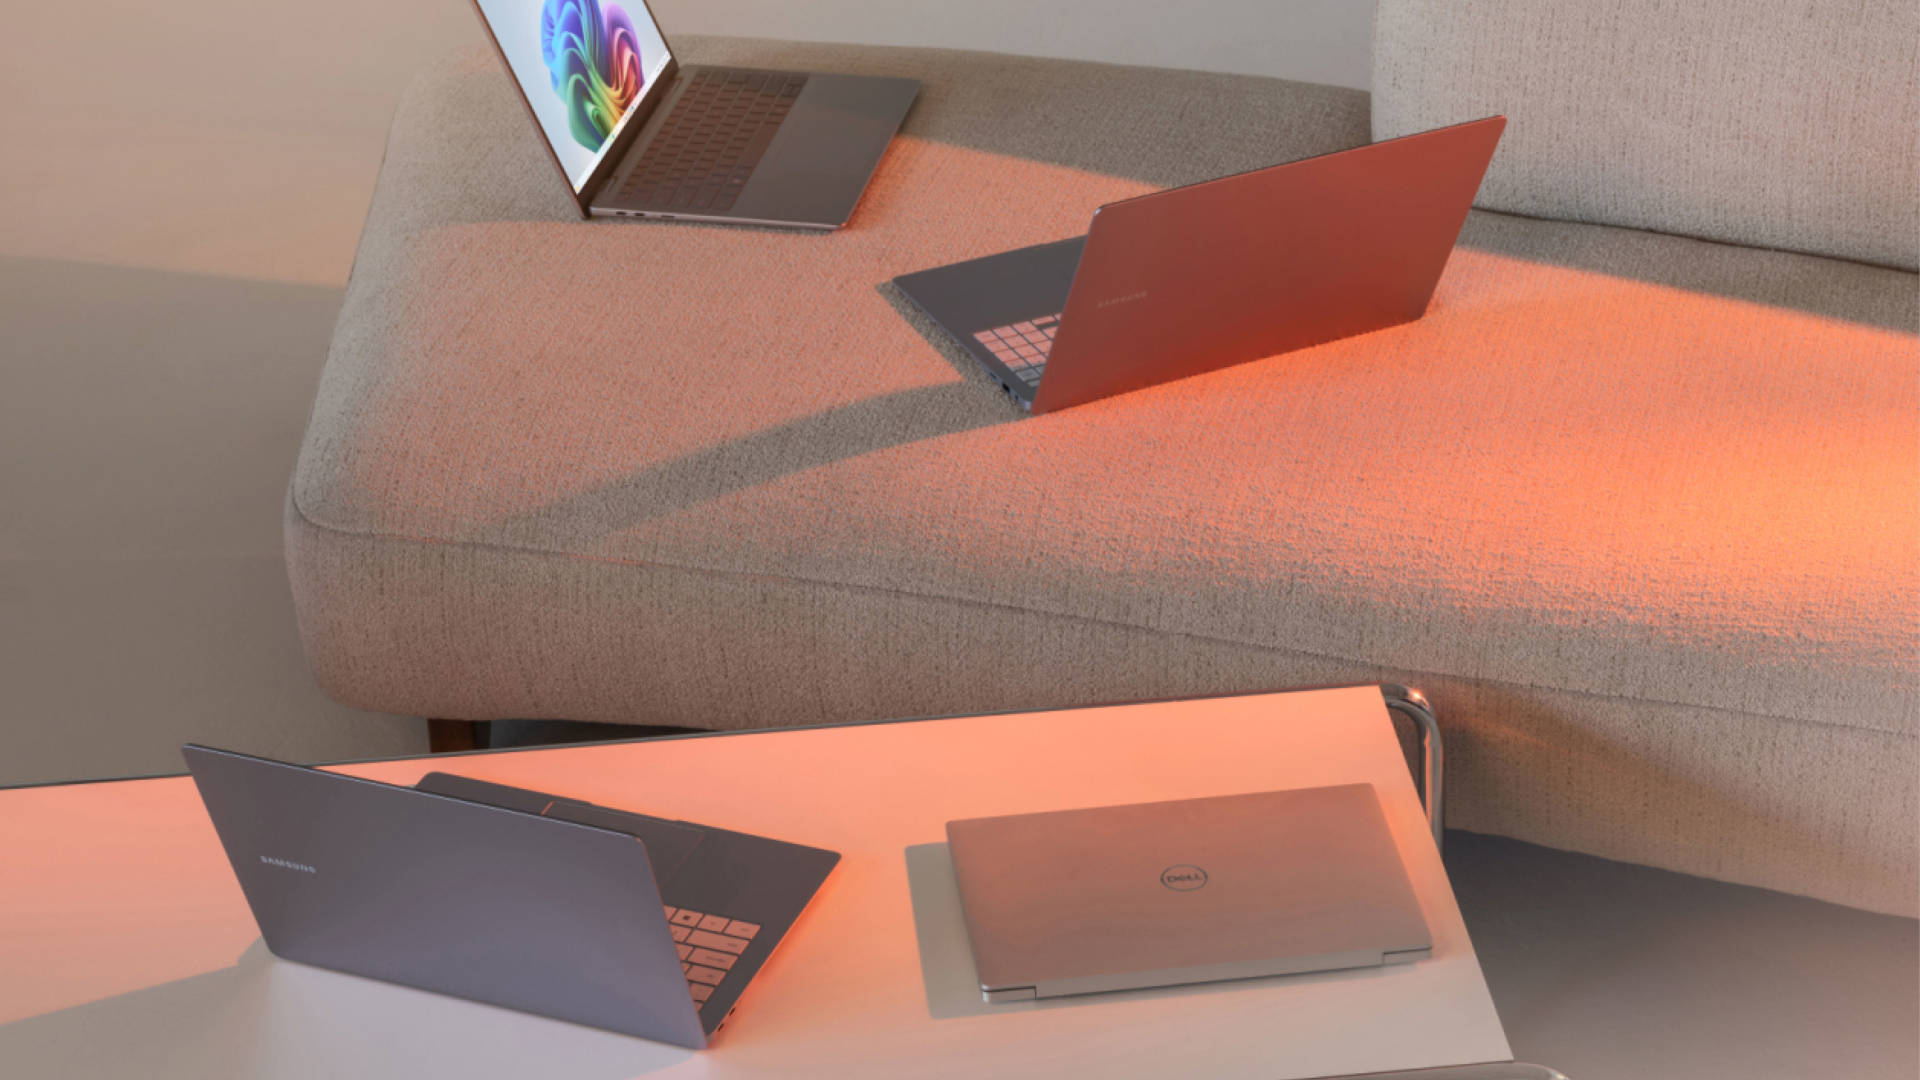 A promotional image showing several laptops resting on furniture, as part of Microsoft's Copilot+ AI PC ecosystem